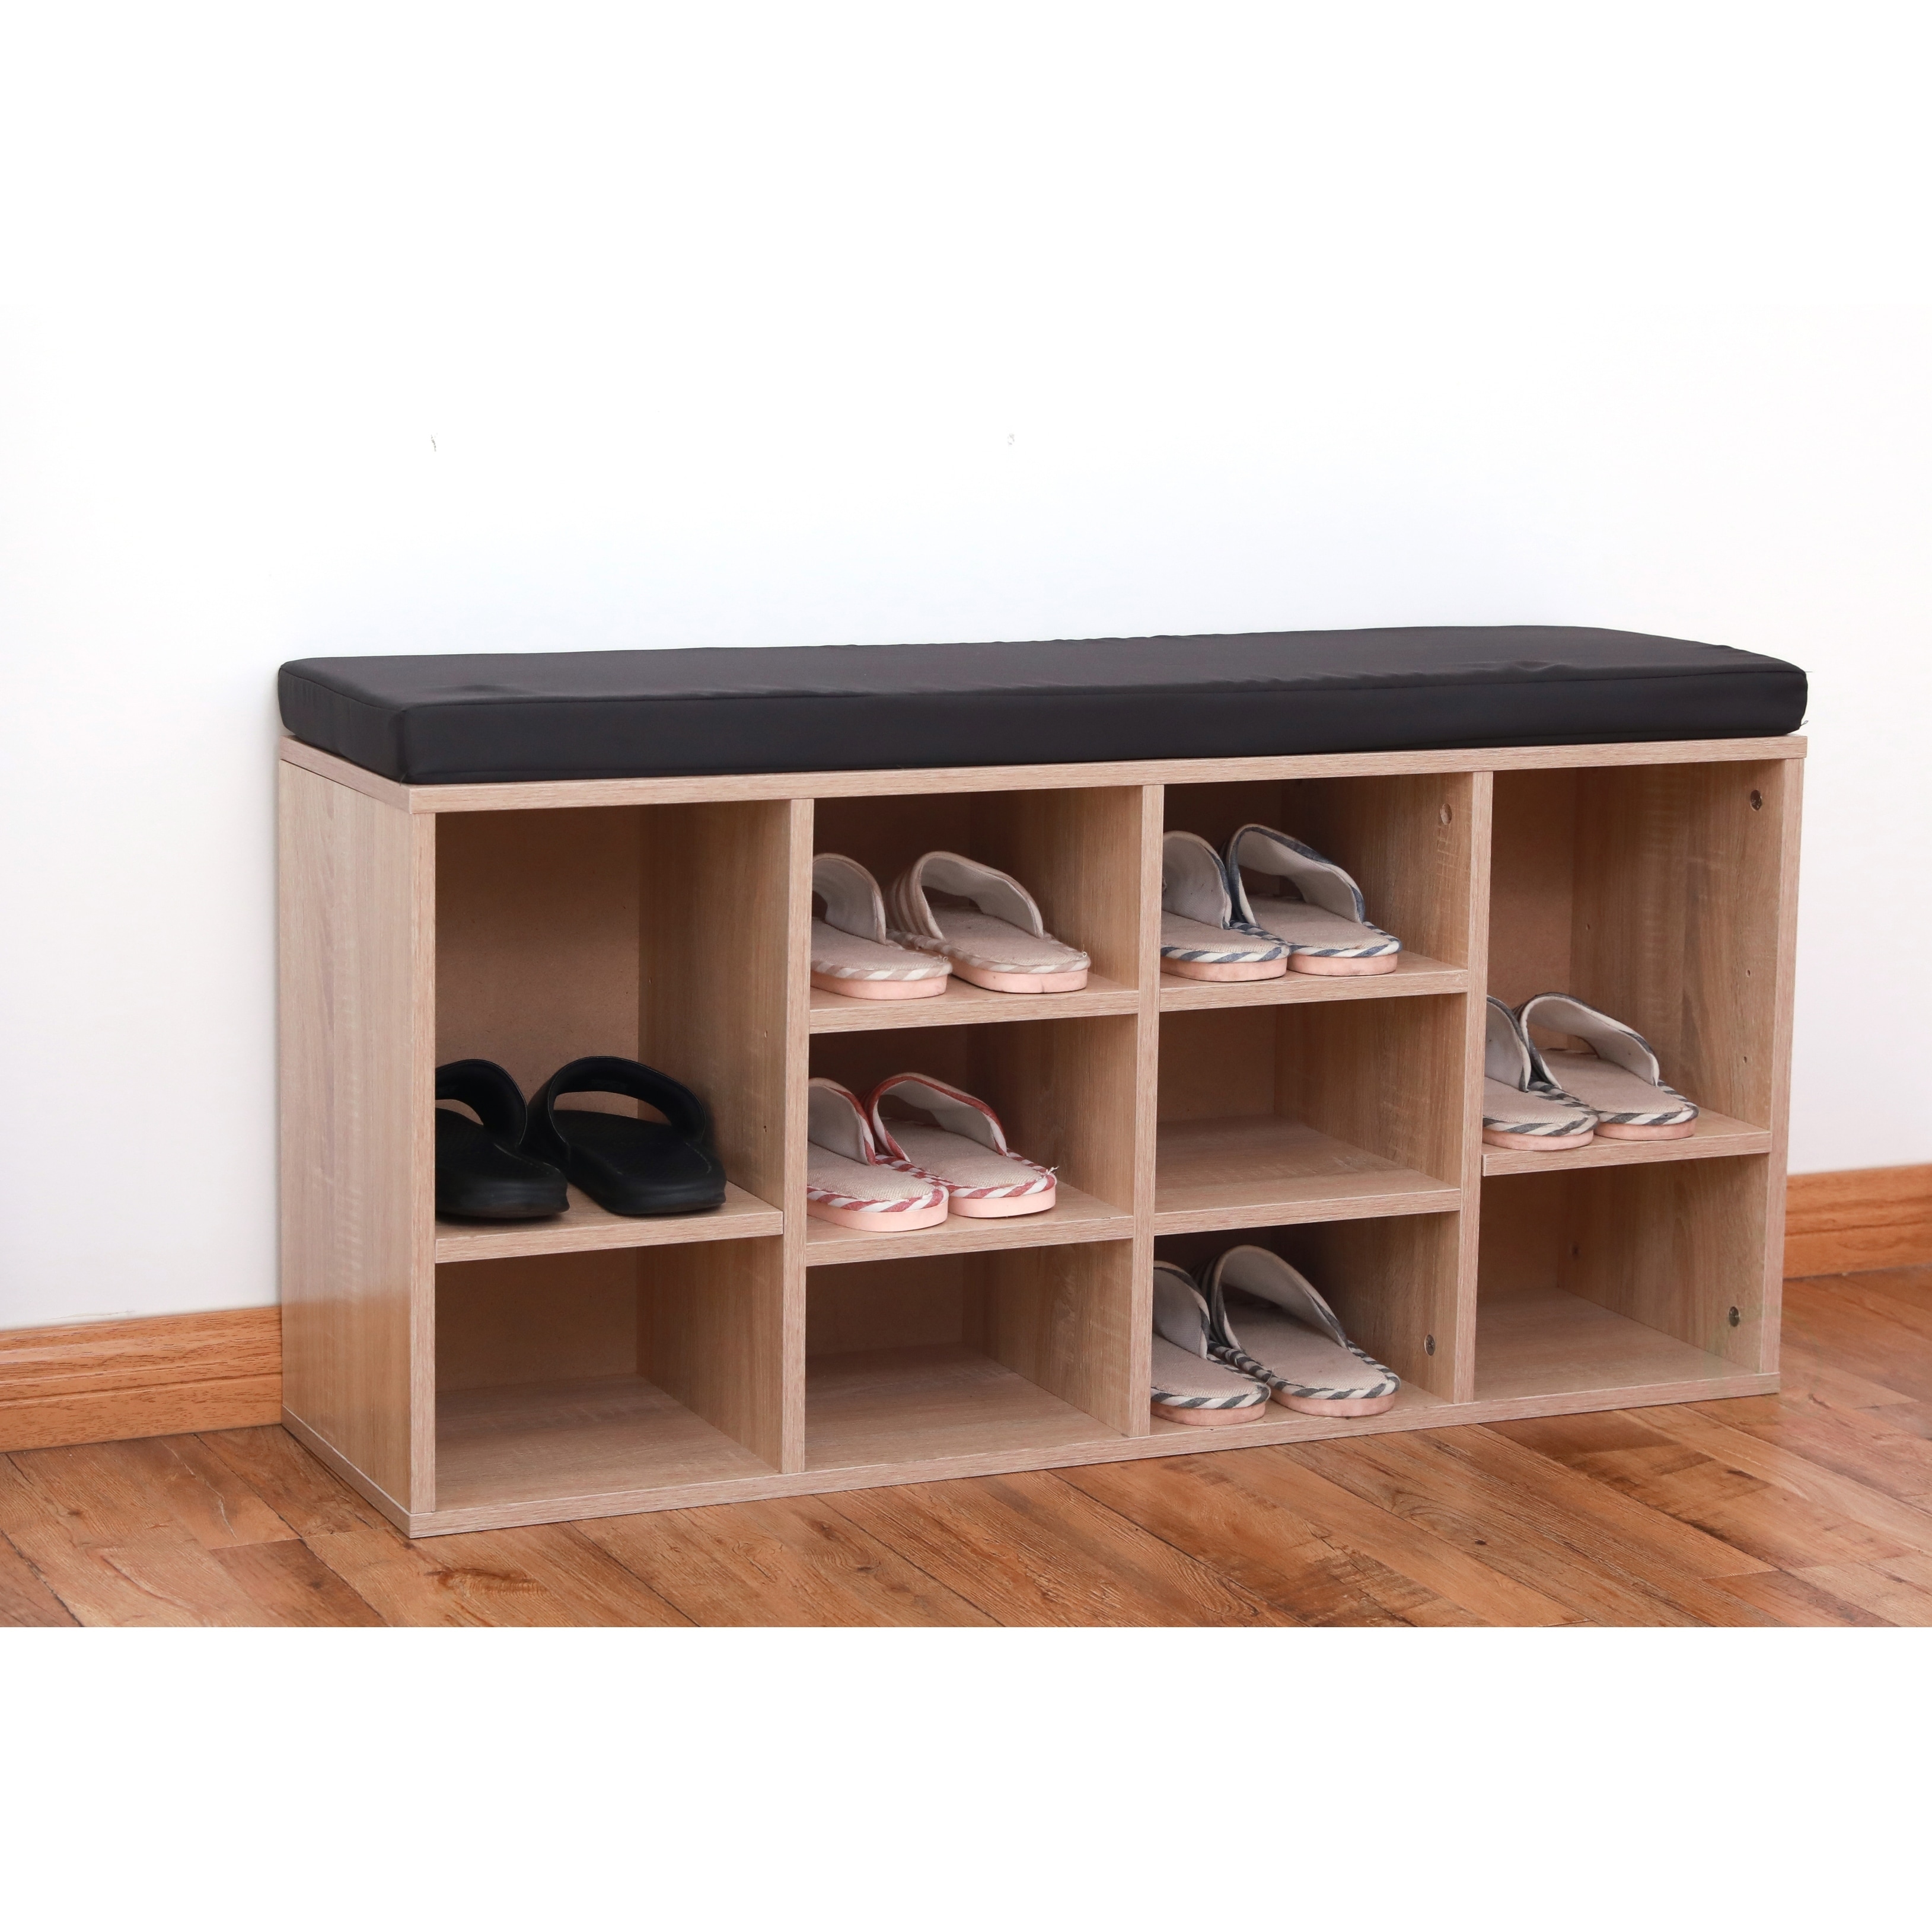 Home Garden Benches Stools Espresso Finish Wooden Shoe Storage Bench Cubby Cushion Entryway Organizer Seat Stbaliaacid